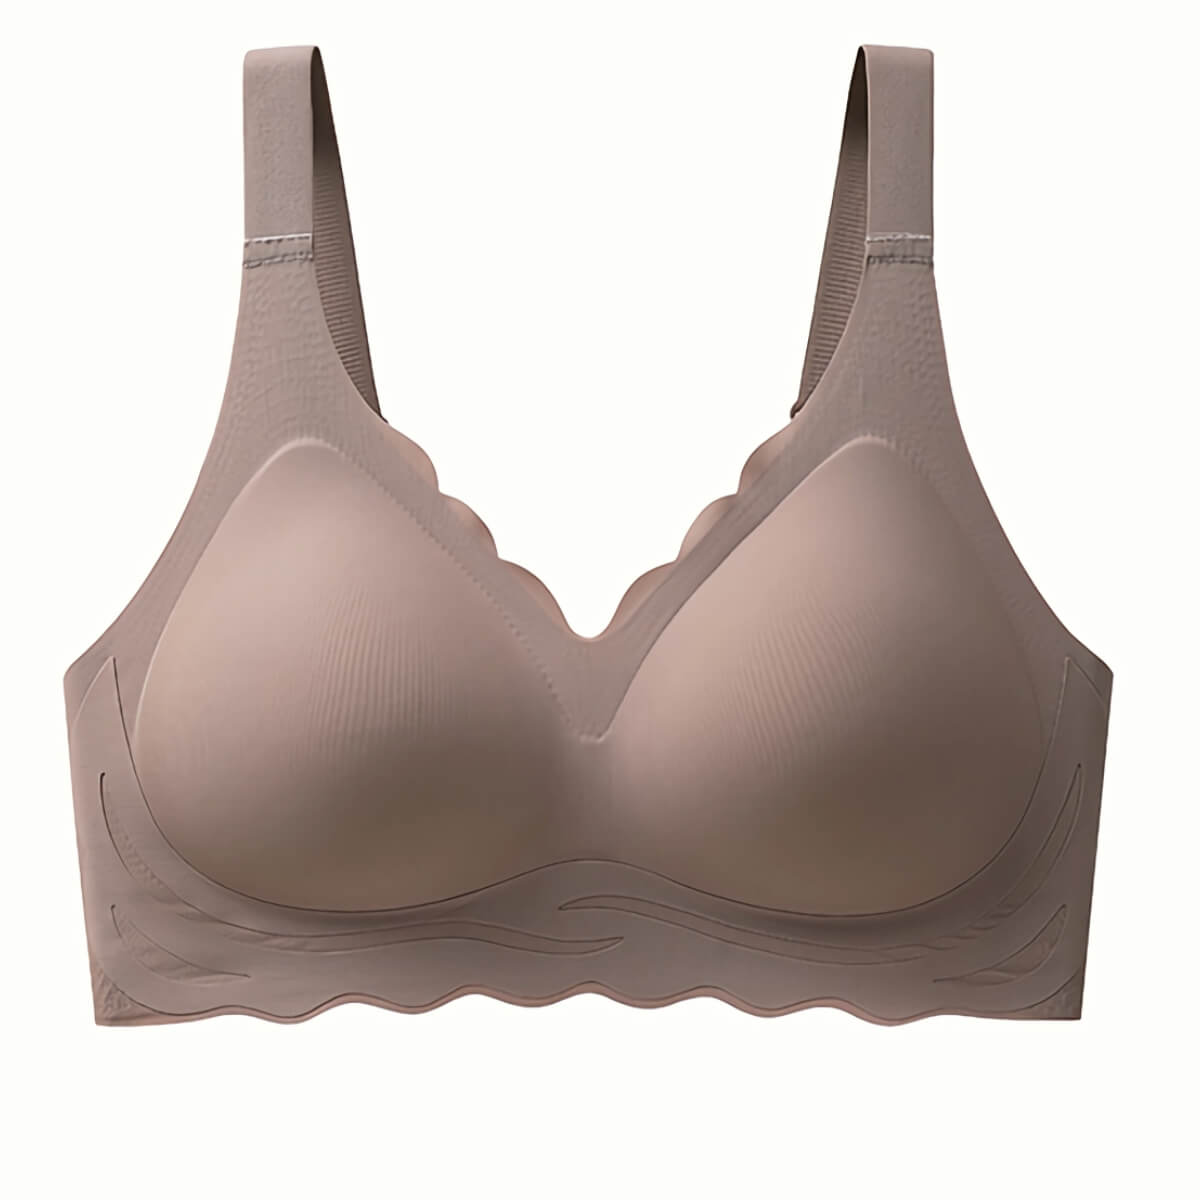 Anti-Sagging, Comfortable and Seamless, This Revolutionary Bra Is All the  Rage Right Now!